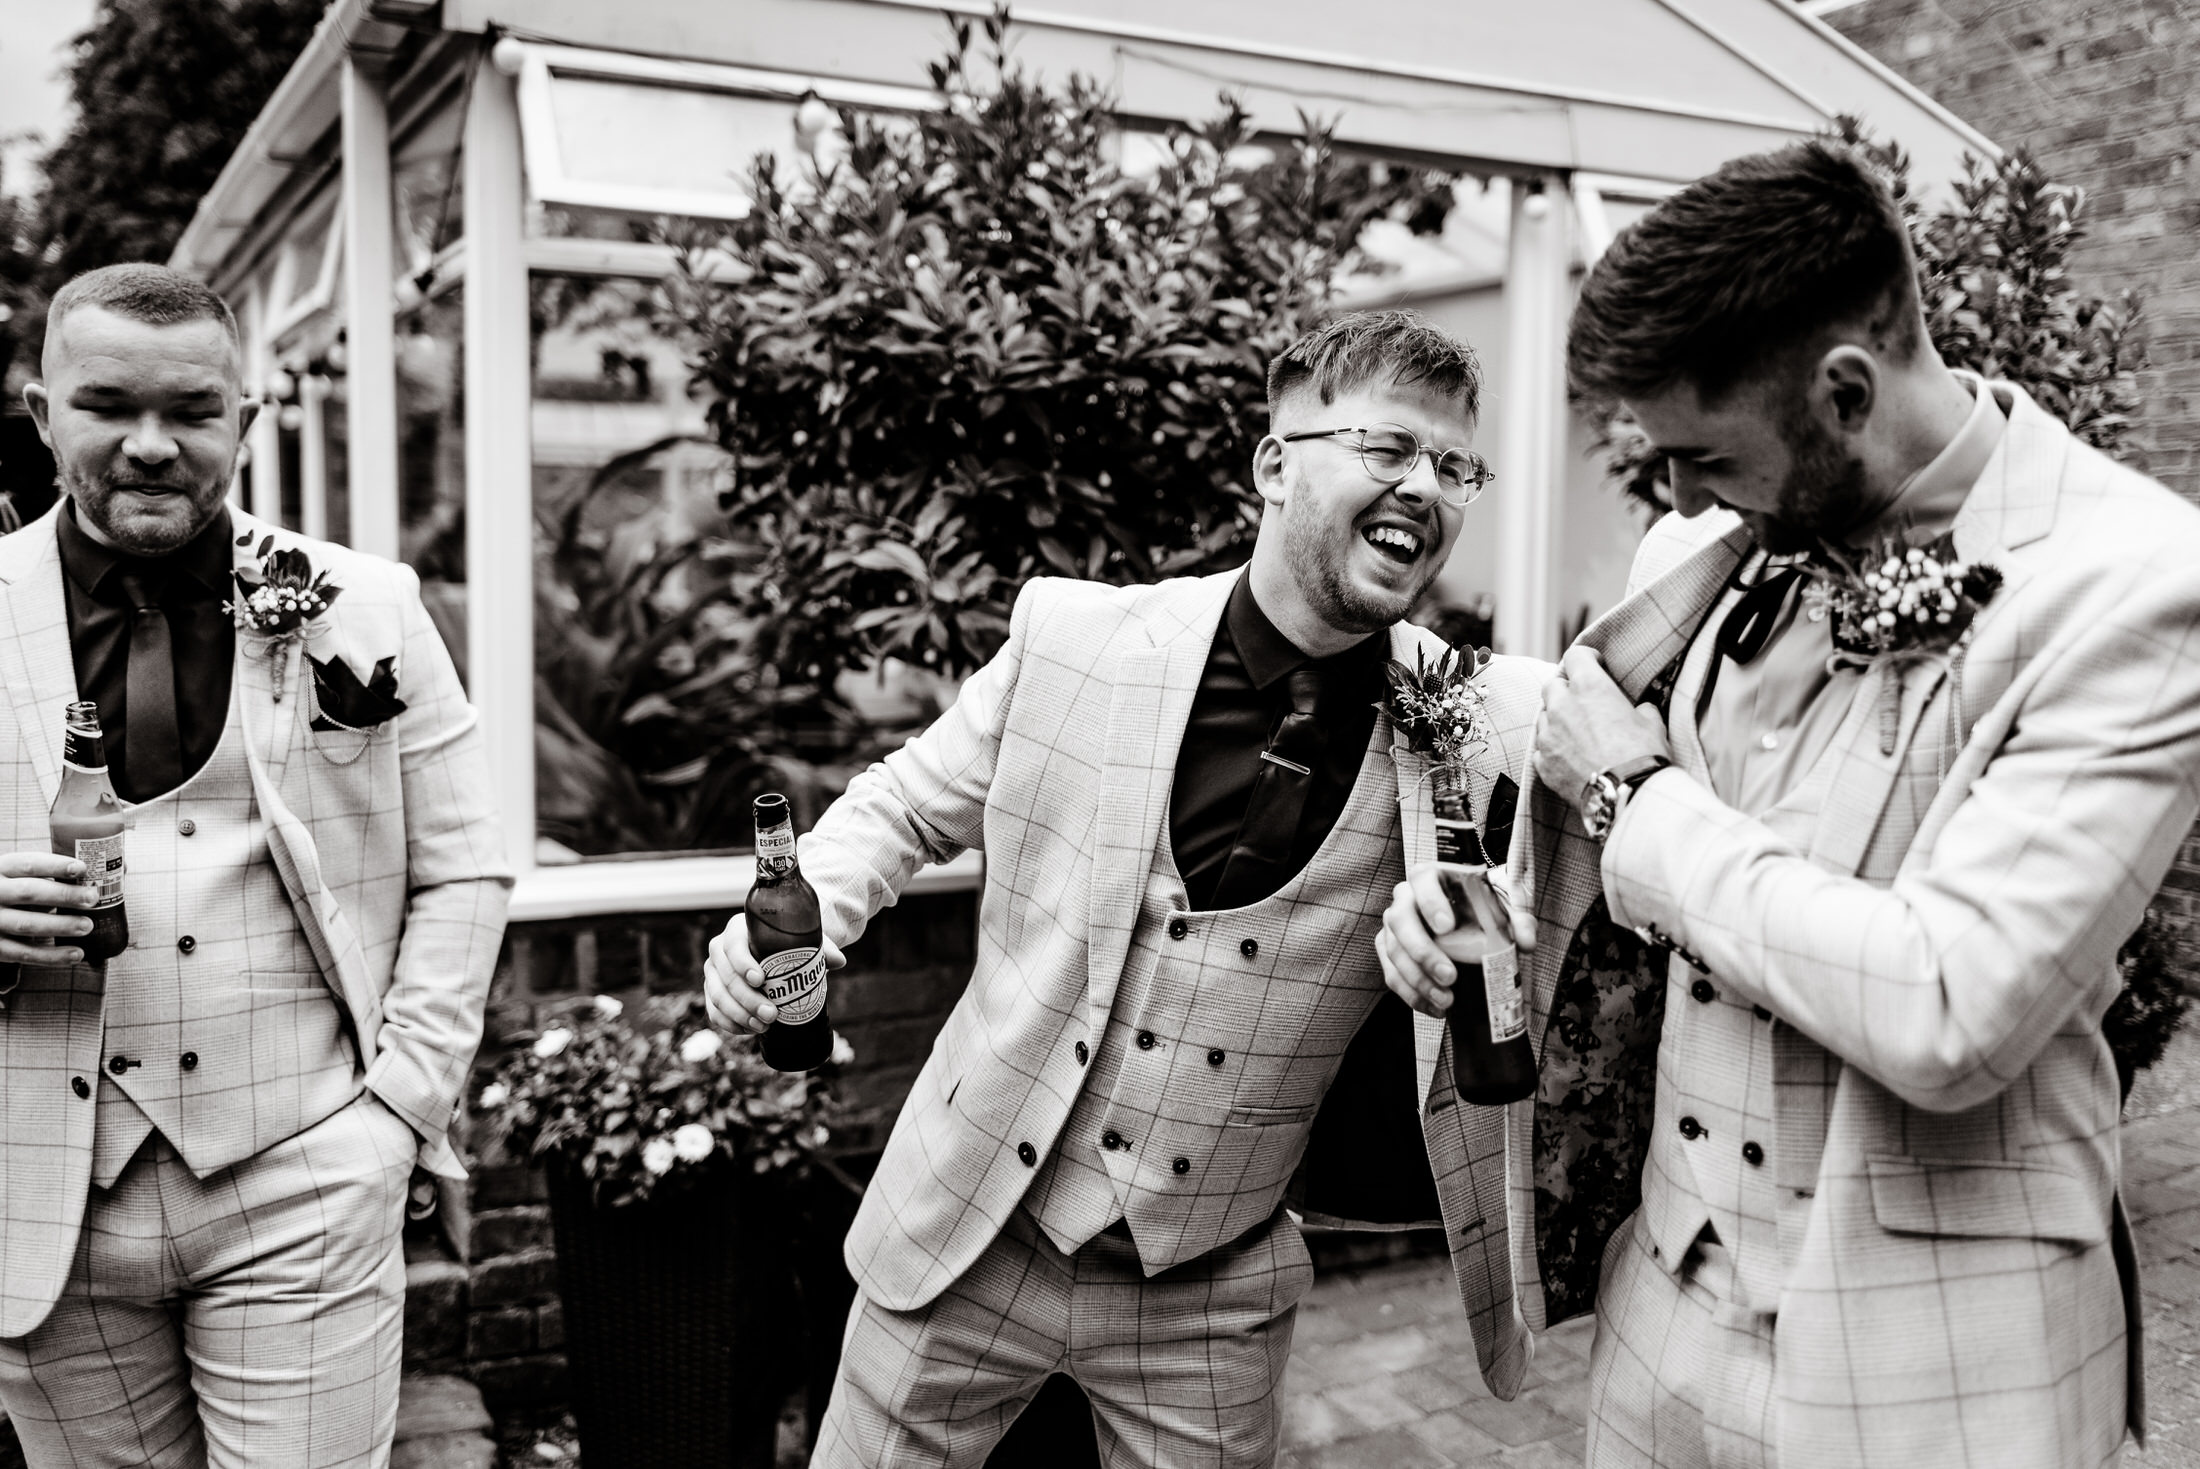 A group of groomsmen laughing in a black and white wedding photo.